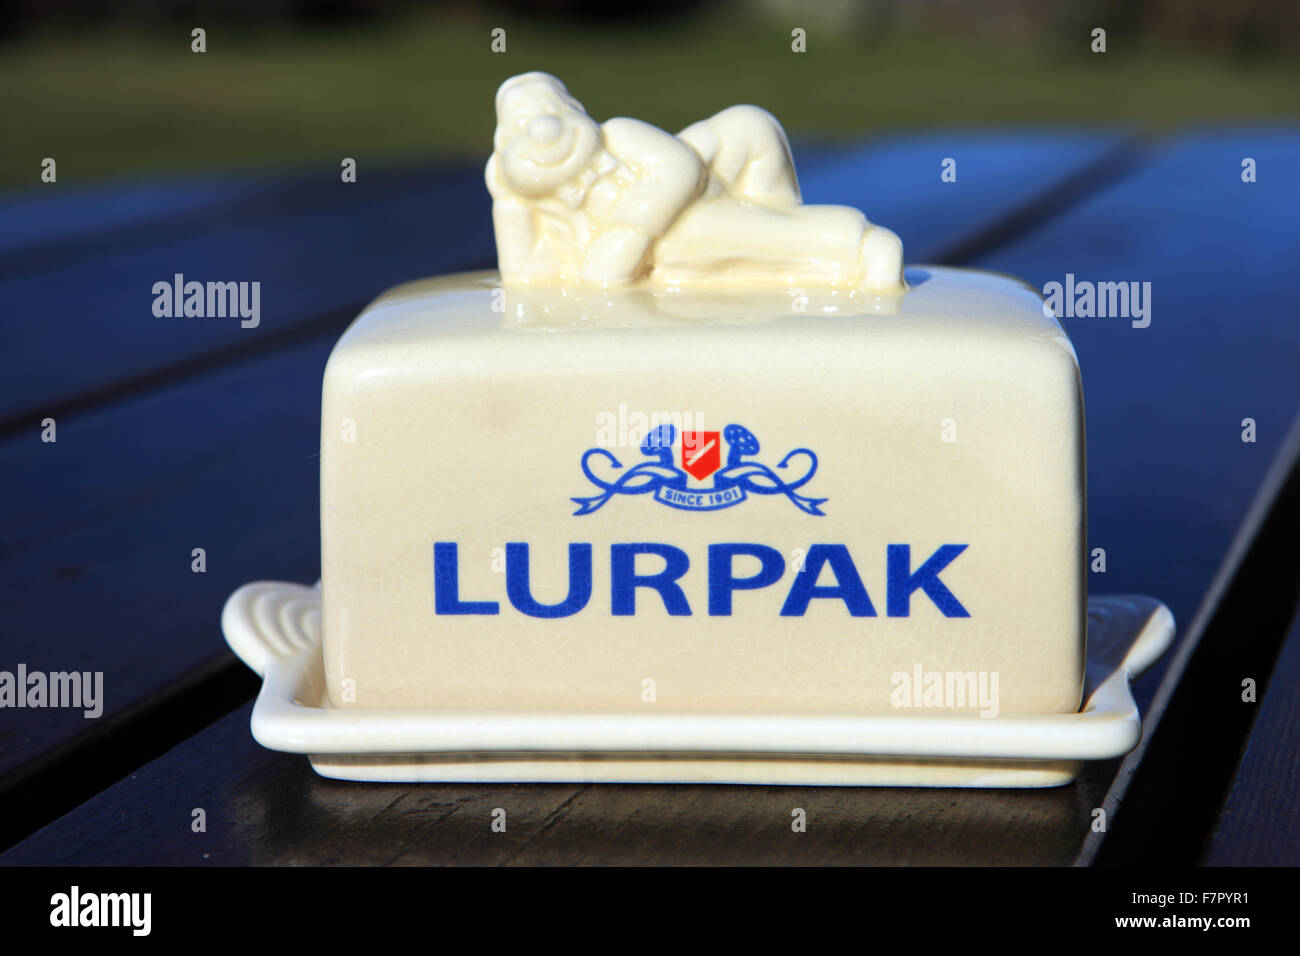 Lurpak butter dish with the Lurpark animated character, Douglas, on top. Stock Photo